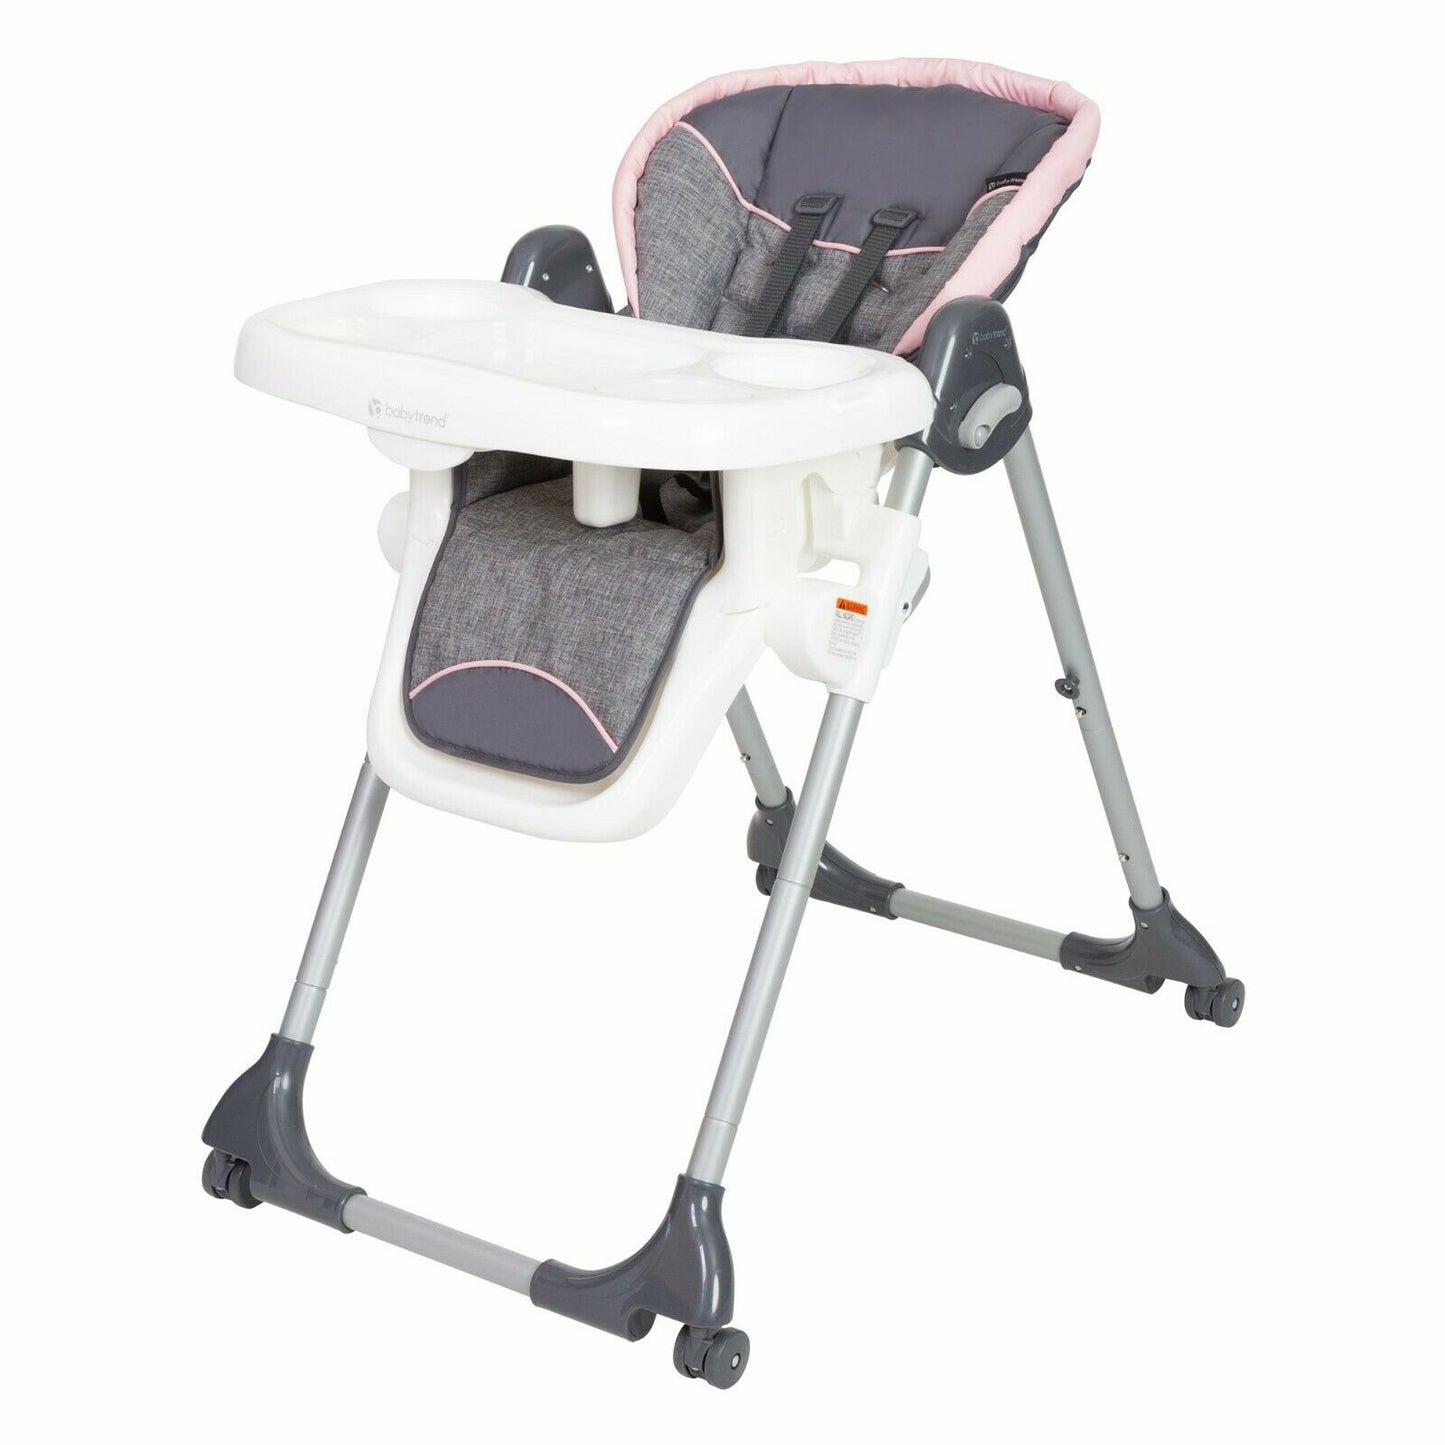 Comfortable Baby Stroller with Car Seat High Chair Playard Swing Travel System